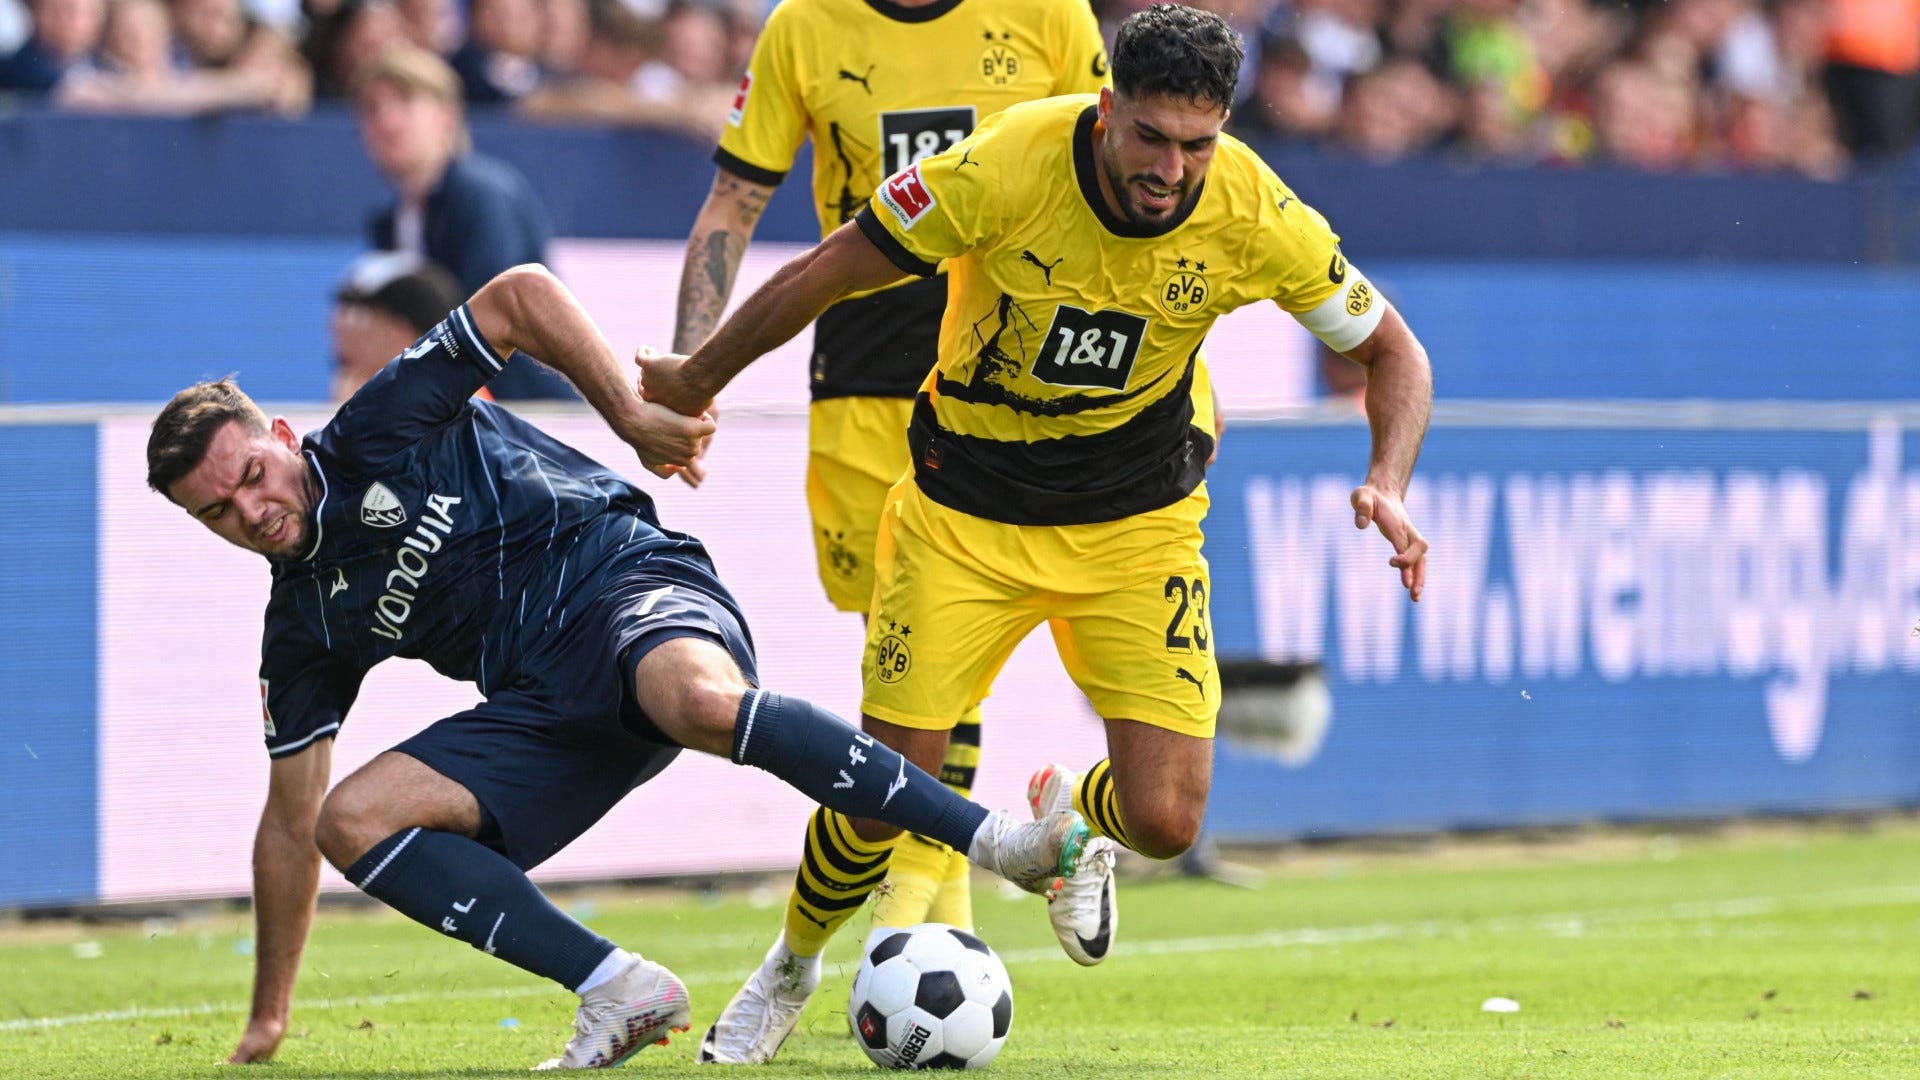 youssoufa moukoko: 17-year-old Borussia Dortmund player Youssoufa Moukoko  impresses with immense talent. Will he play for Germany in Qatar? - The  Economic Times